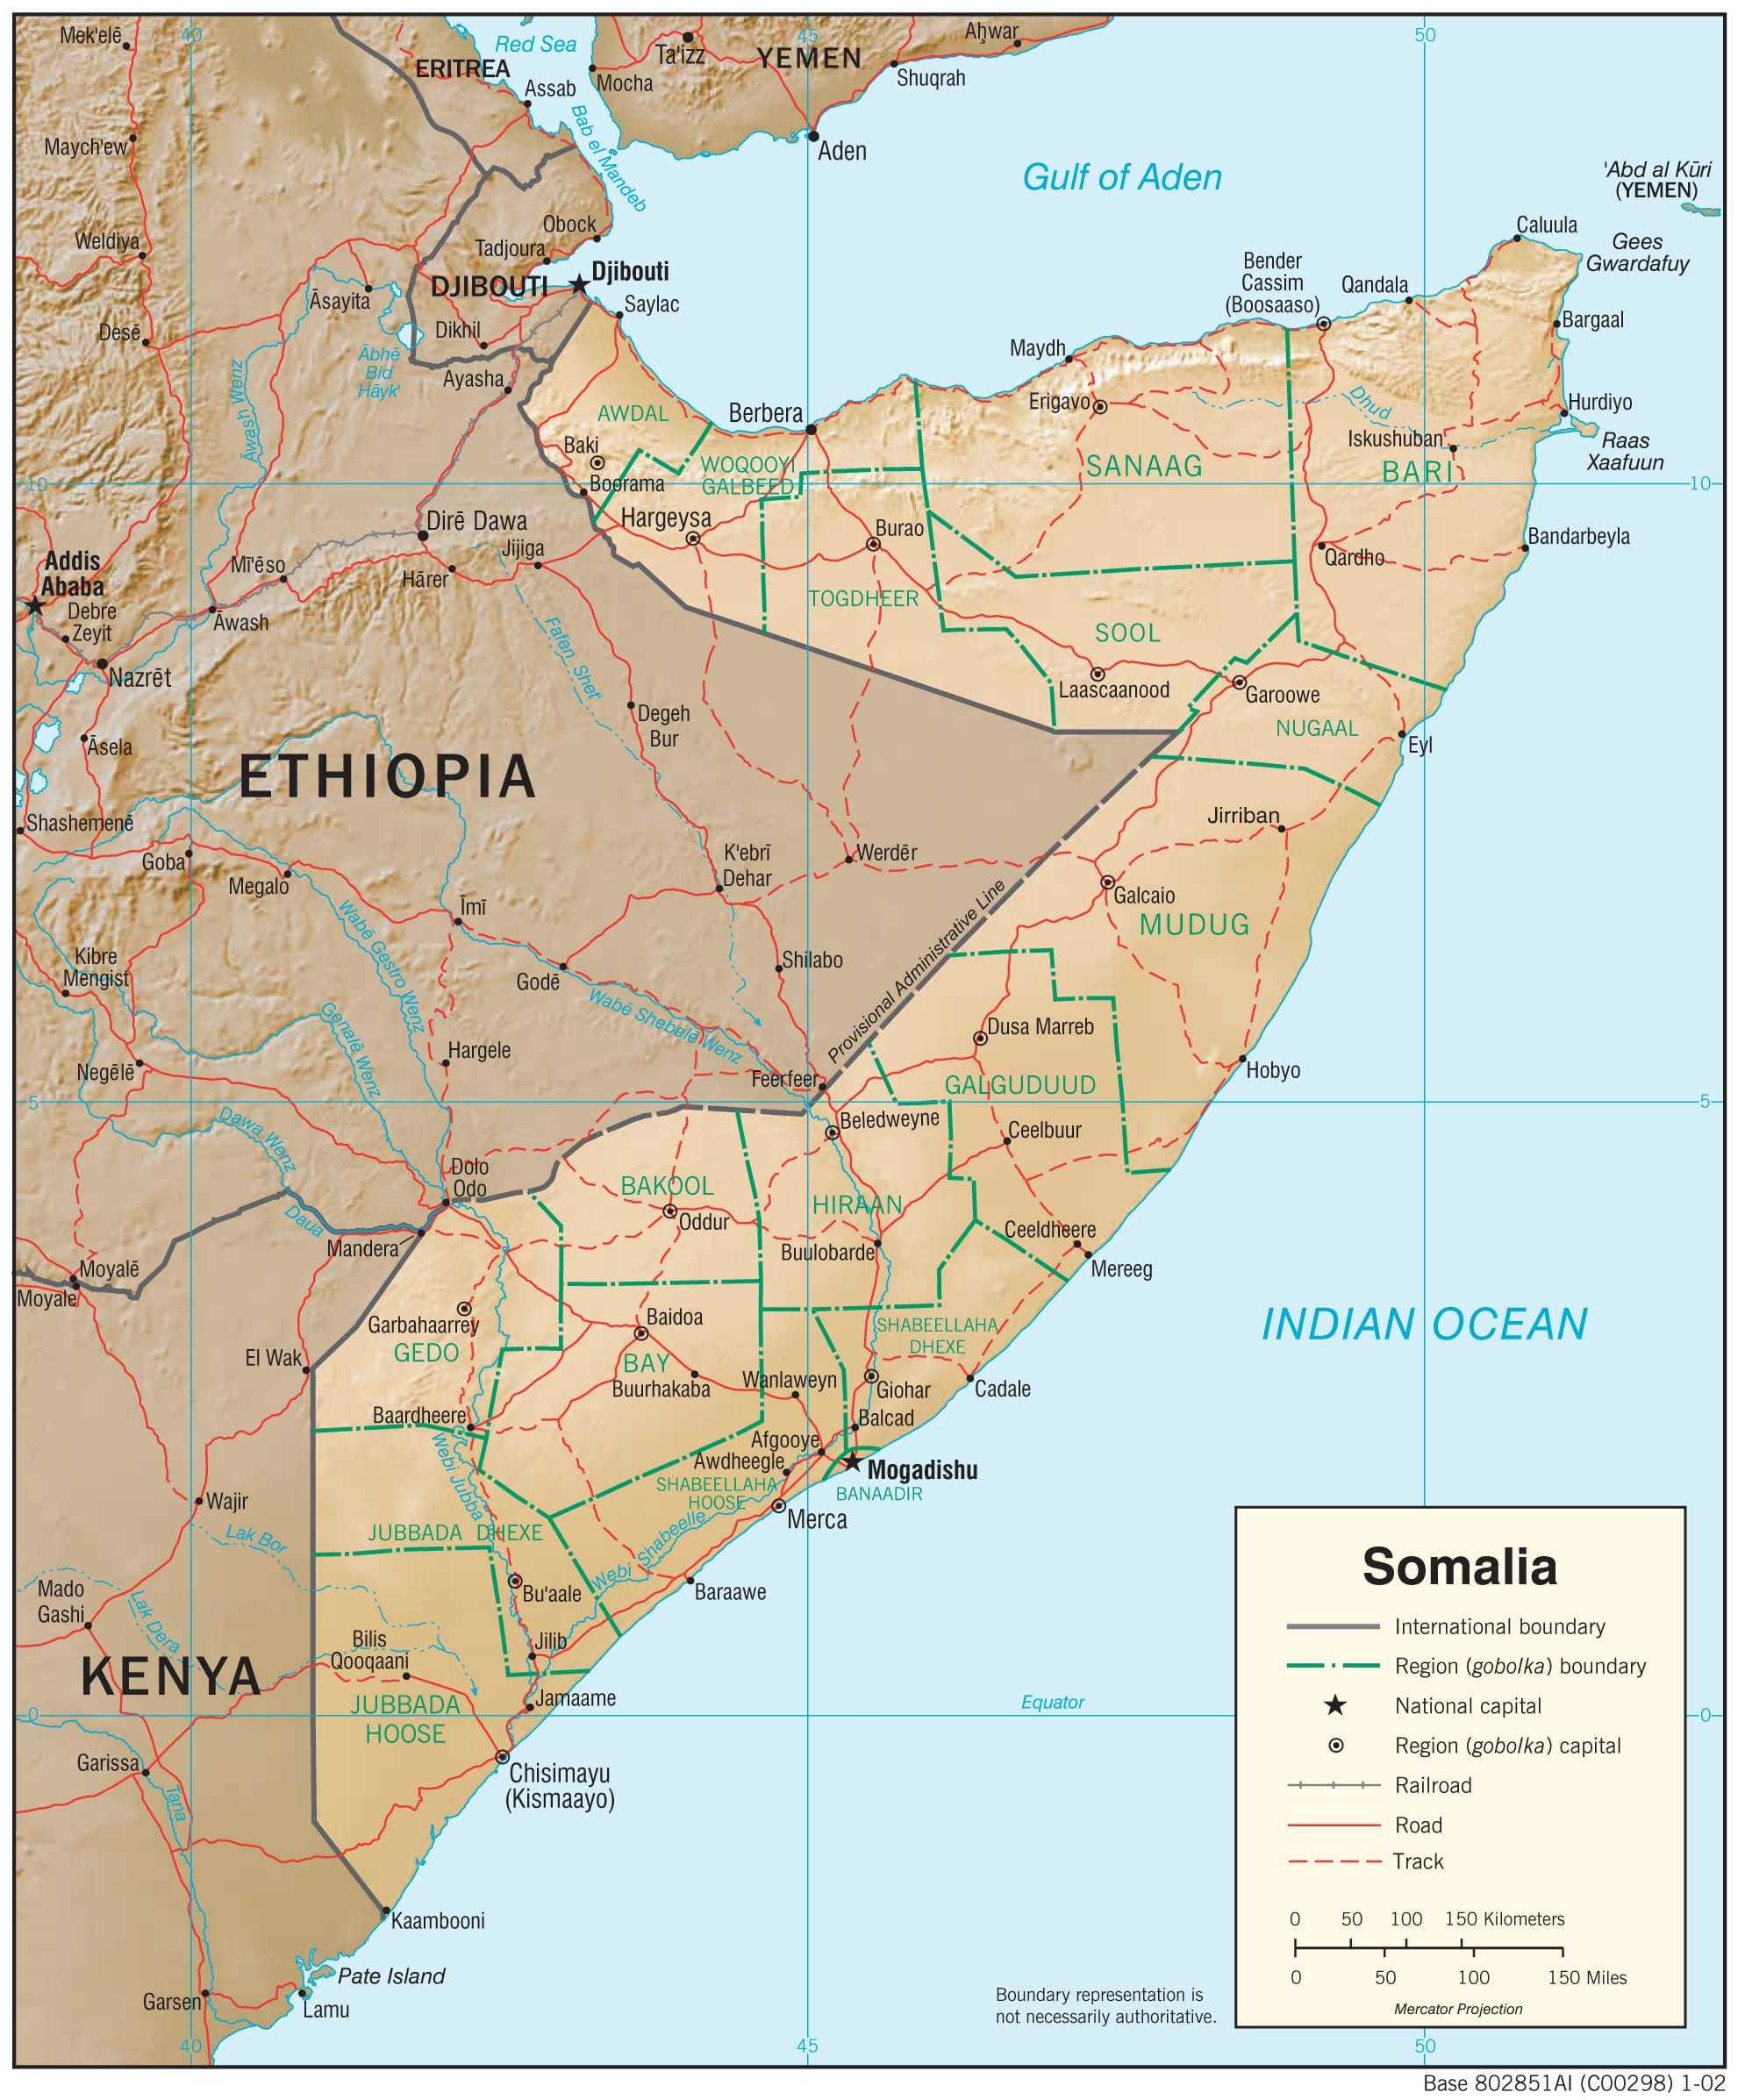 Physiographical map of Somalia.